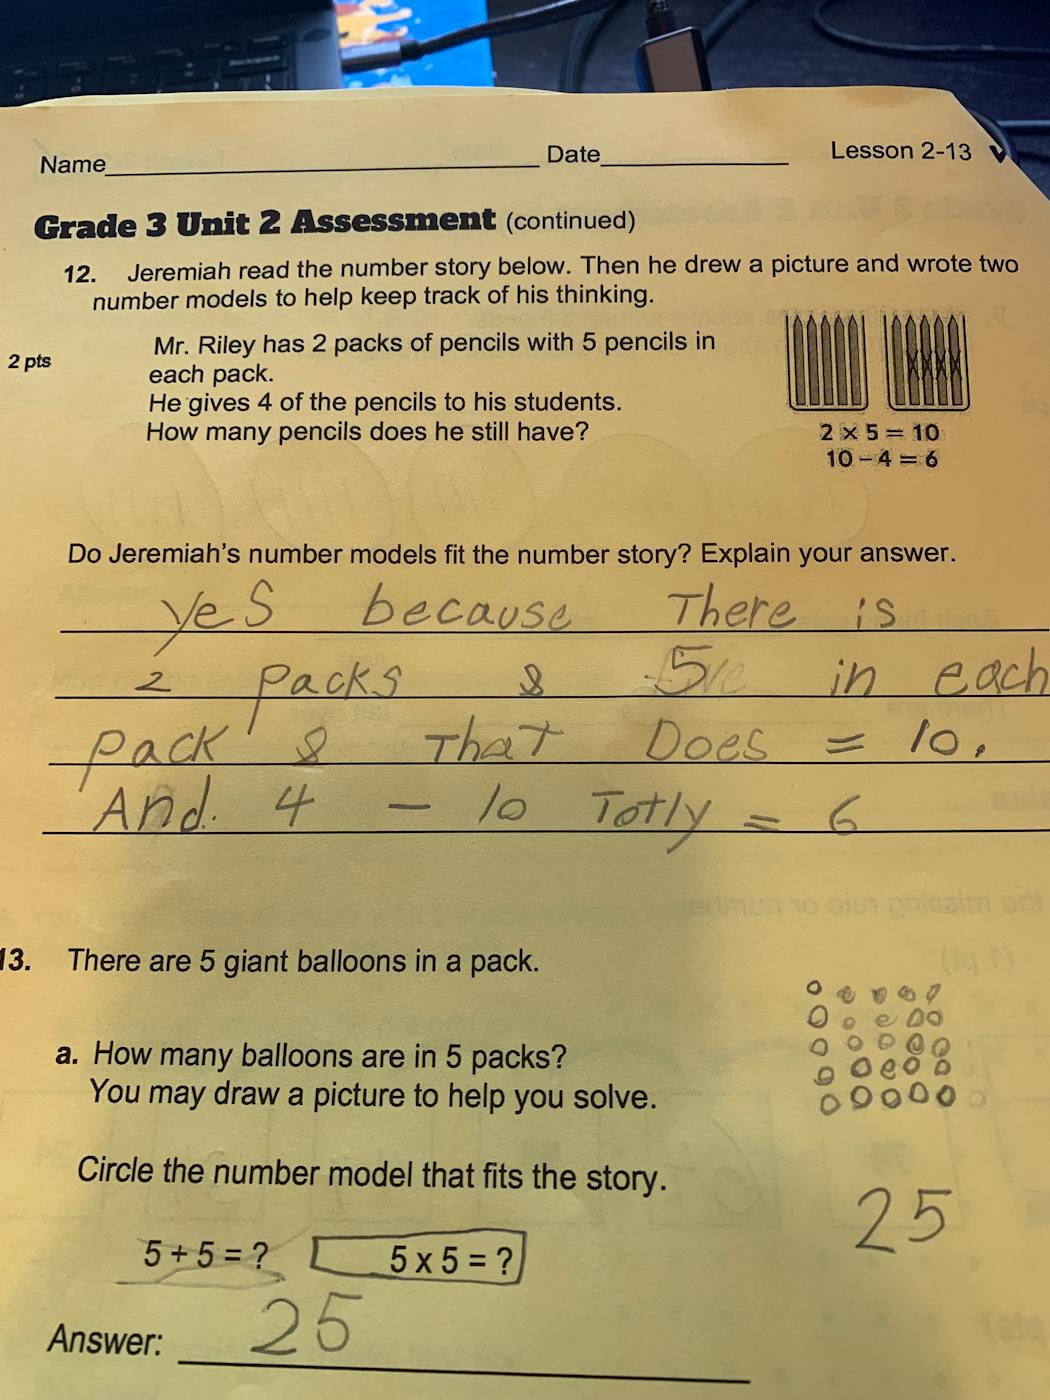 Students are often asked to draw and explain their answers when solving math problems. 